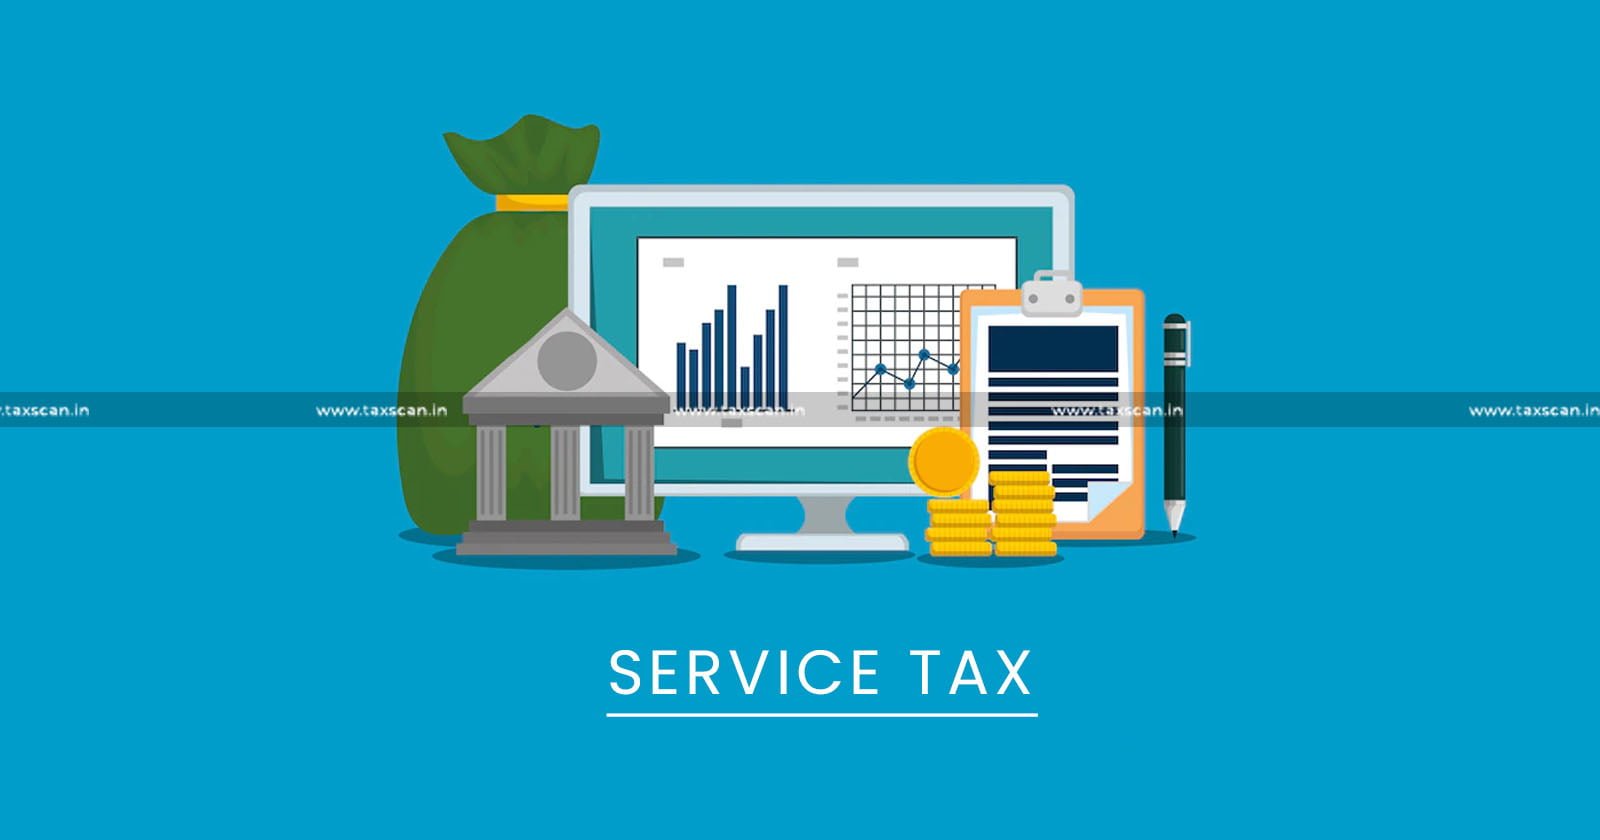 Subsequent -Service - Order- Copy - Date - Communication - Order-in-Original-CESTAT - Service- Tax- Demand-TAXSCAN